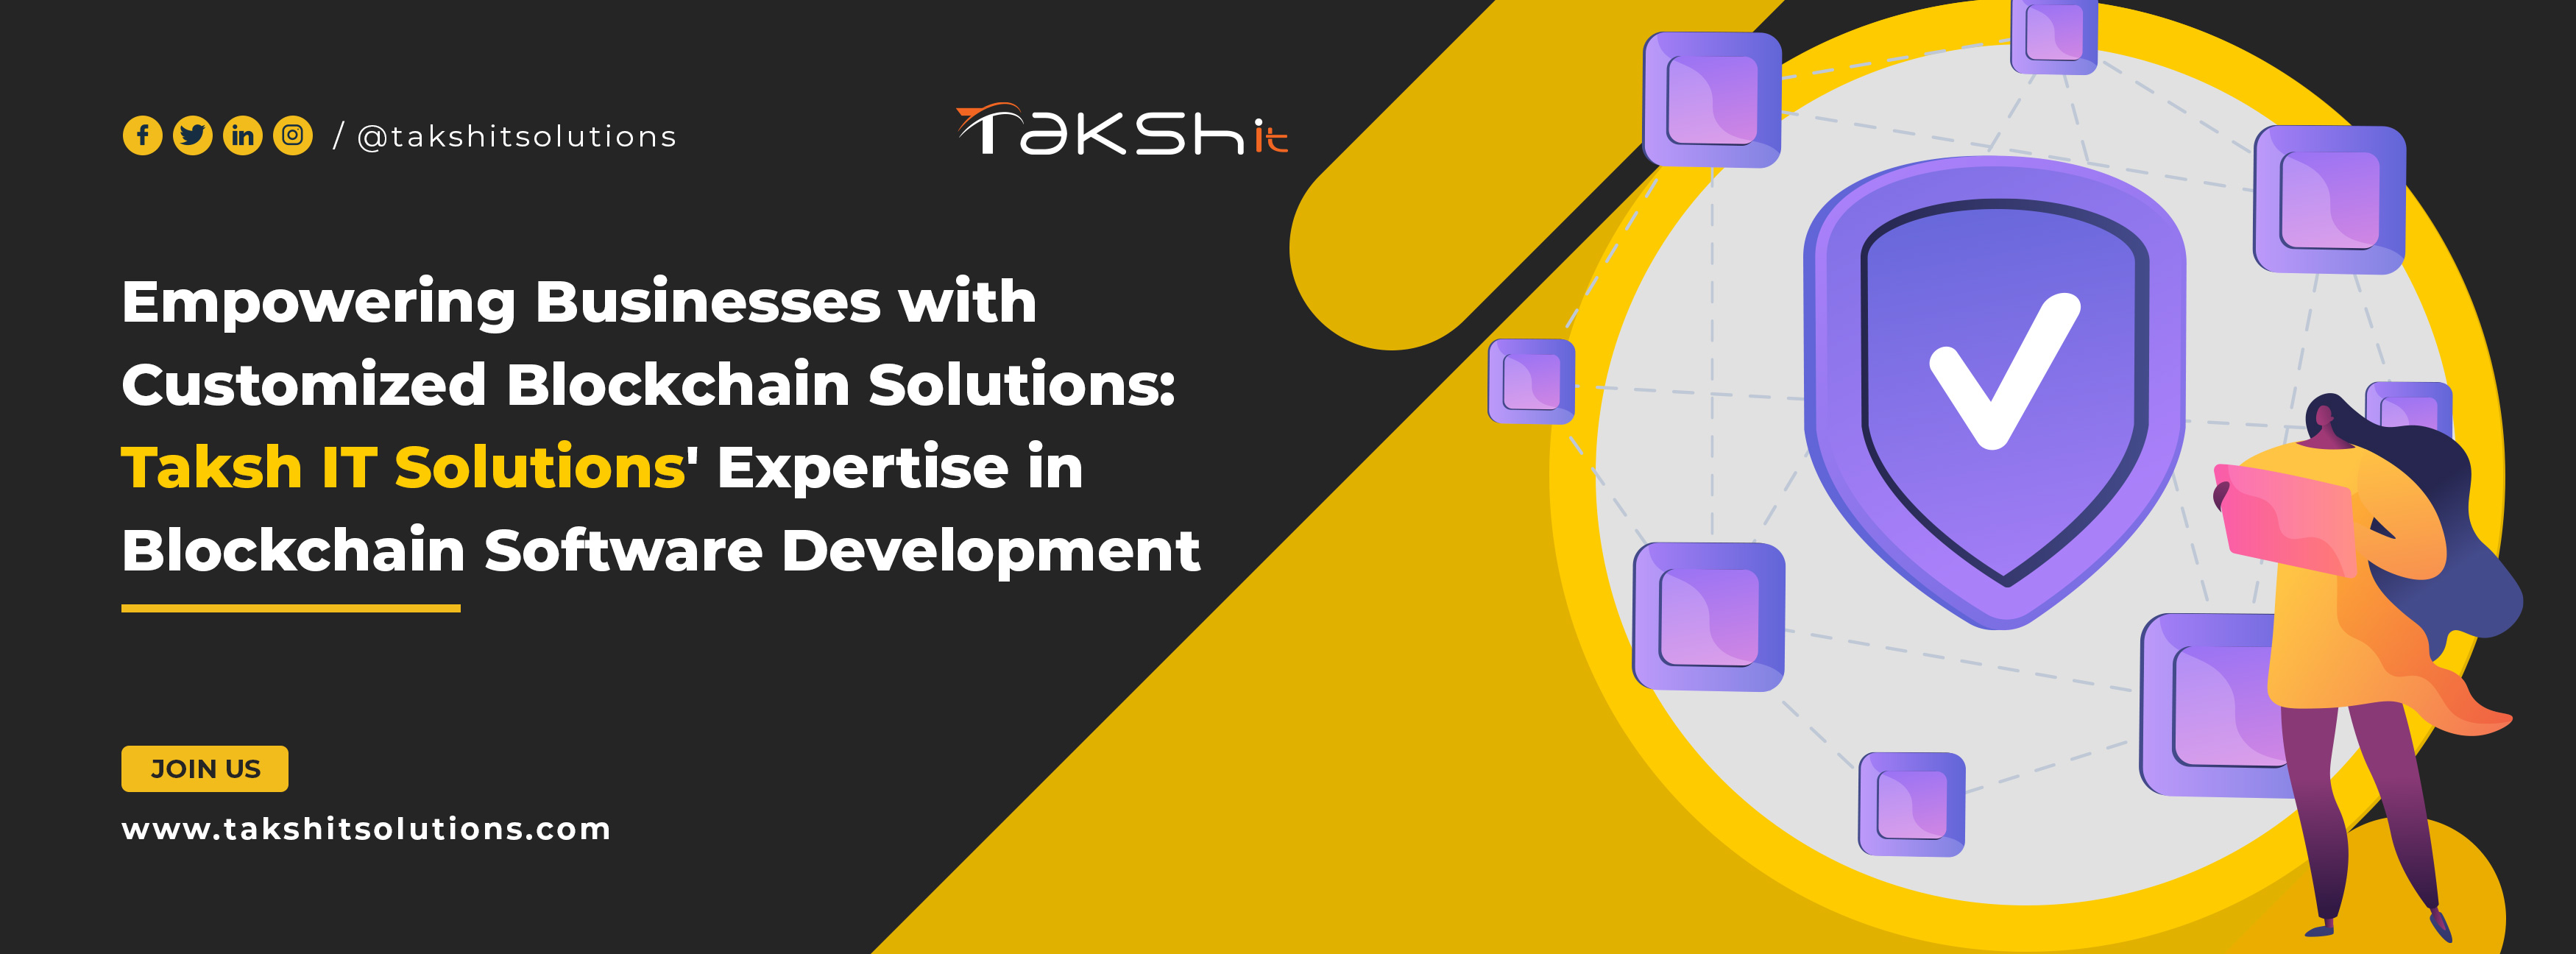 Empowering Businesses with Customized Blockchain Solutions: Taksh IT Solutions Expertise in Blockchain Software Development